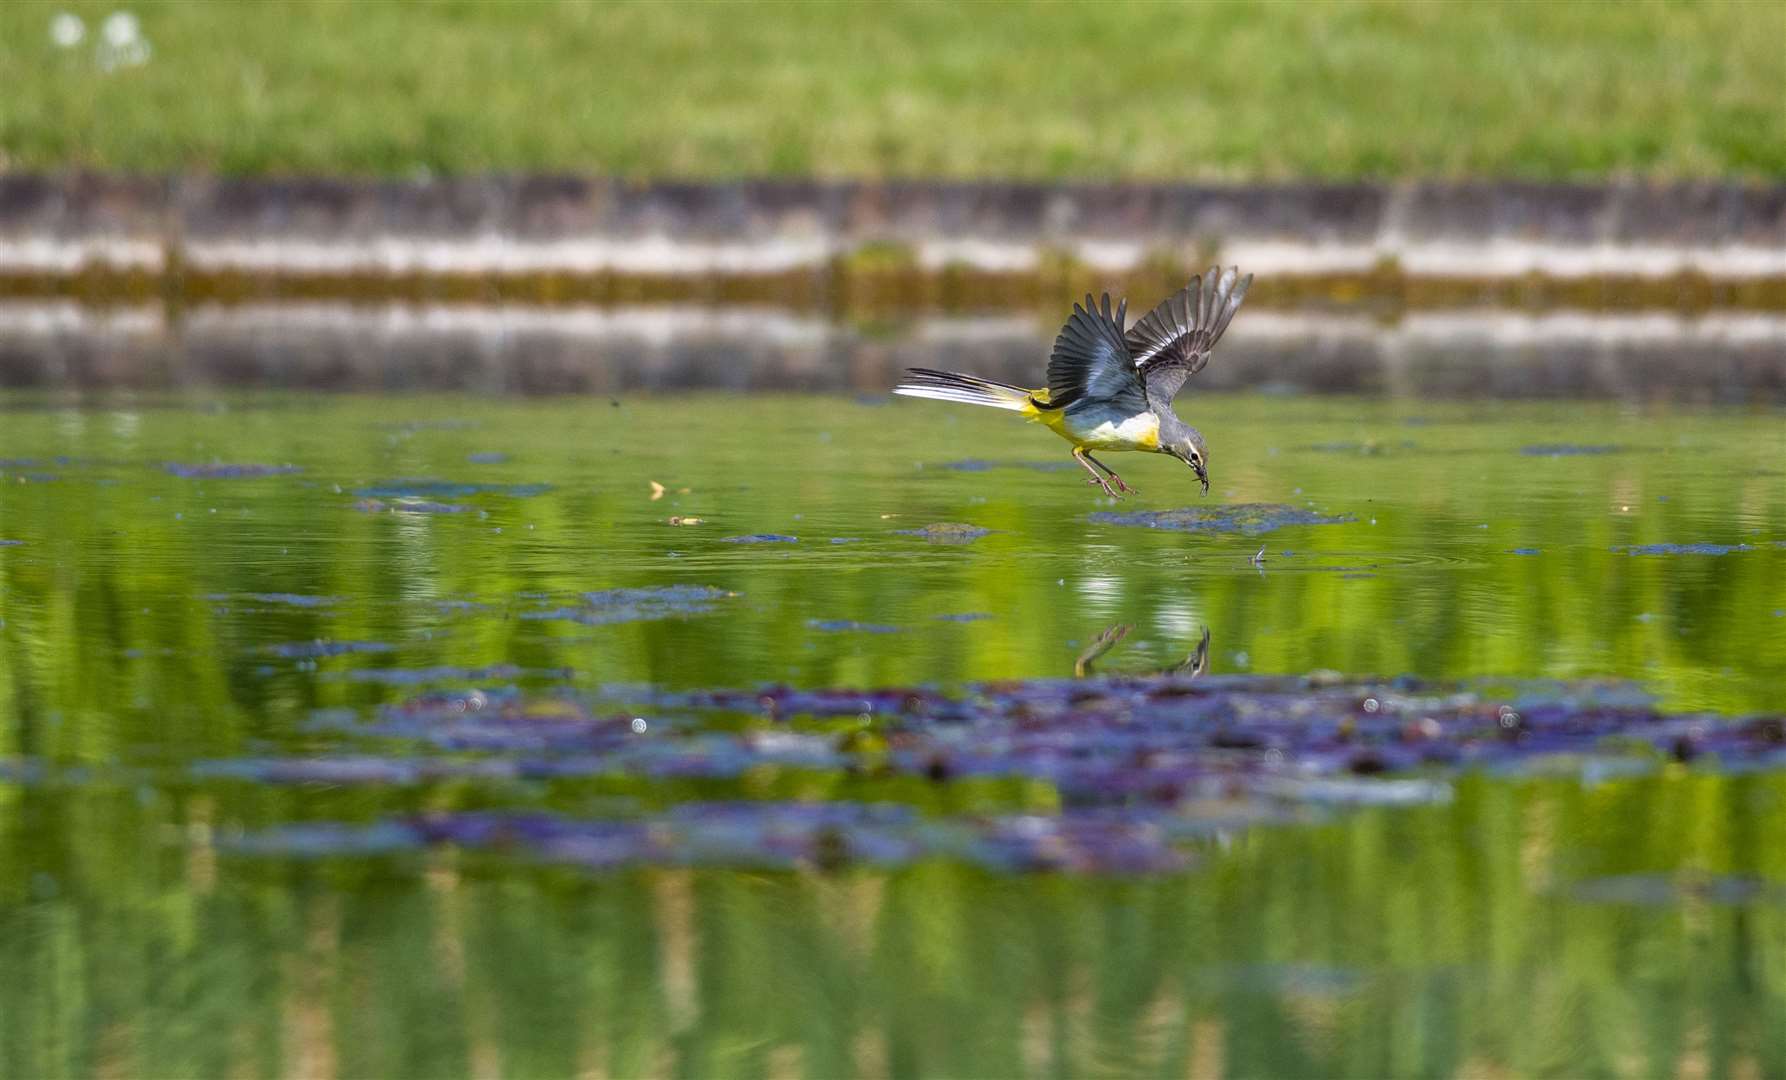 Grey wagtail at the formal pond at Godinton House Picture: Keoghan Bellew